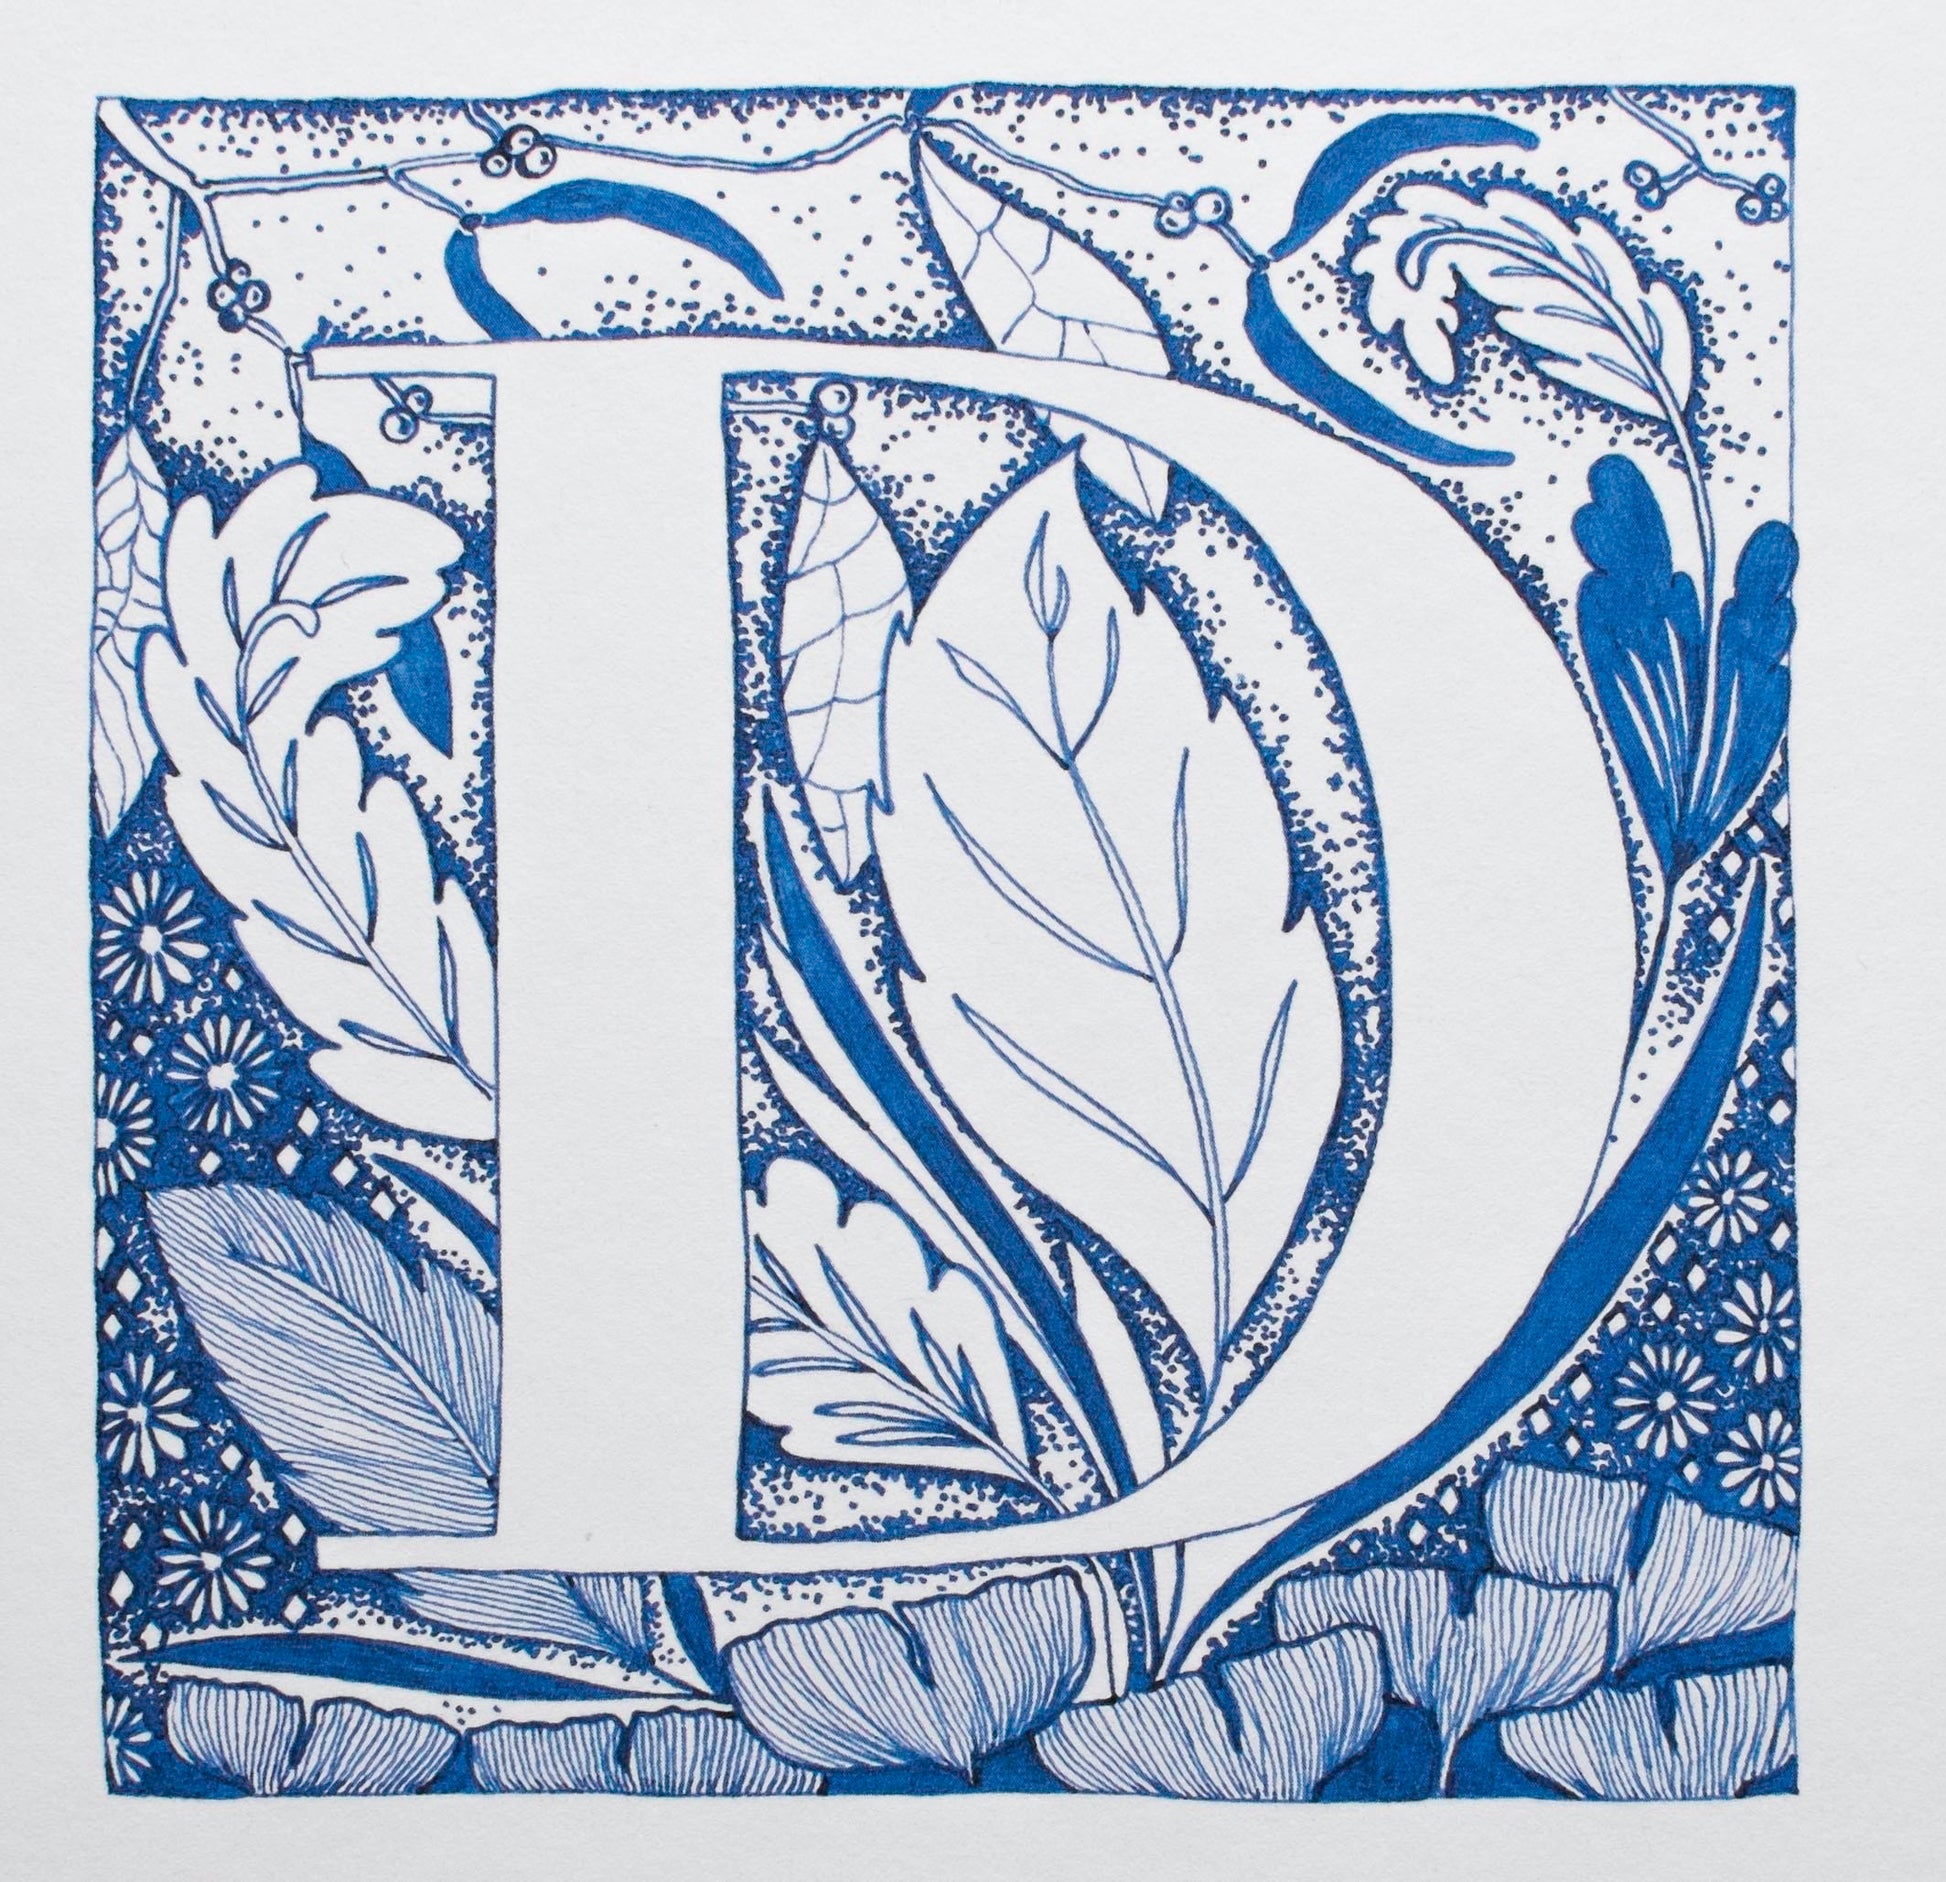 Limited Edition Print of Monogram D, letter print, blue ink, floral, insects details, enluminure, miniature, laurateodoriart